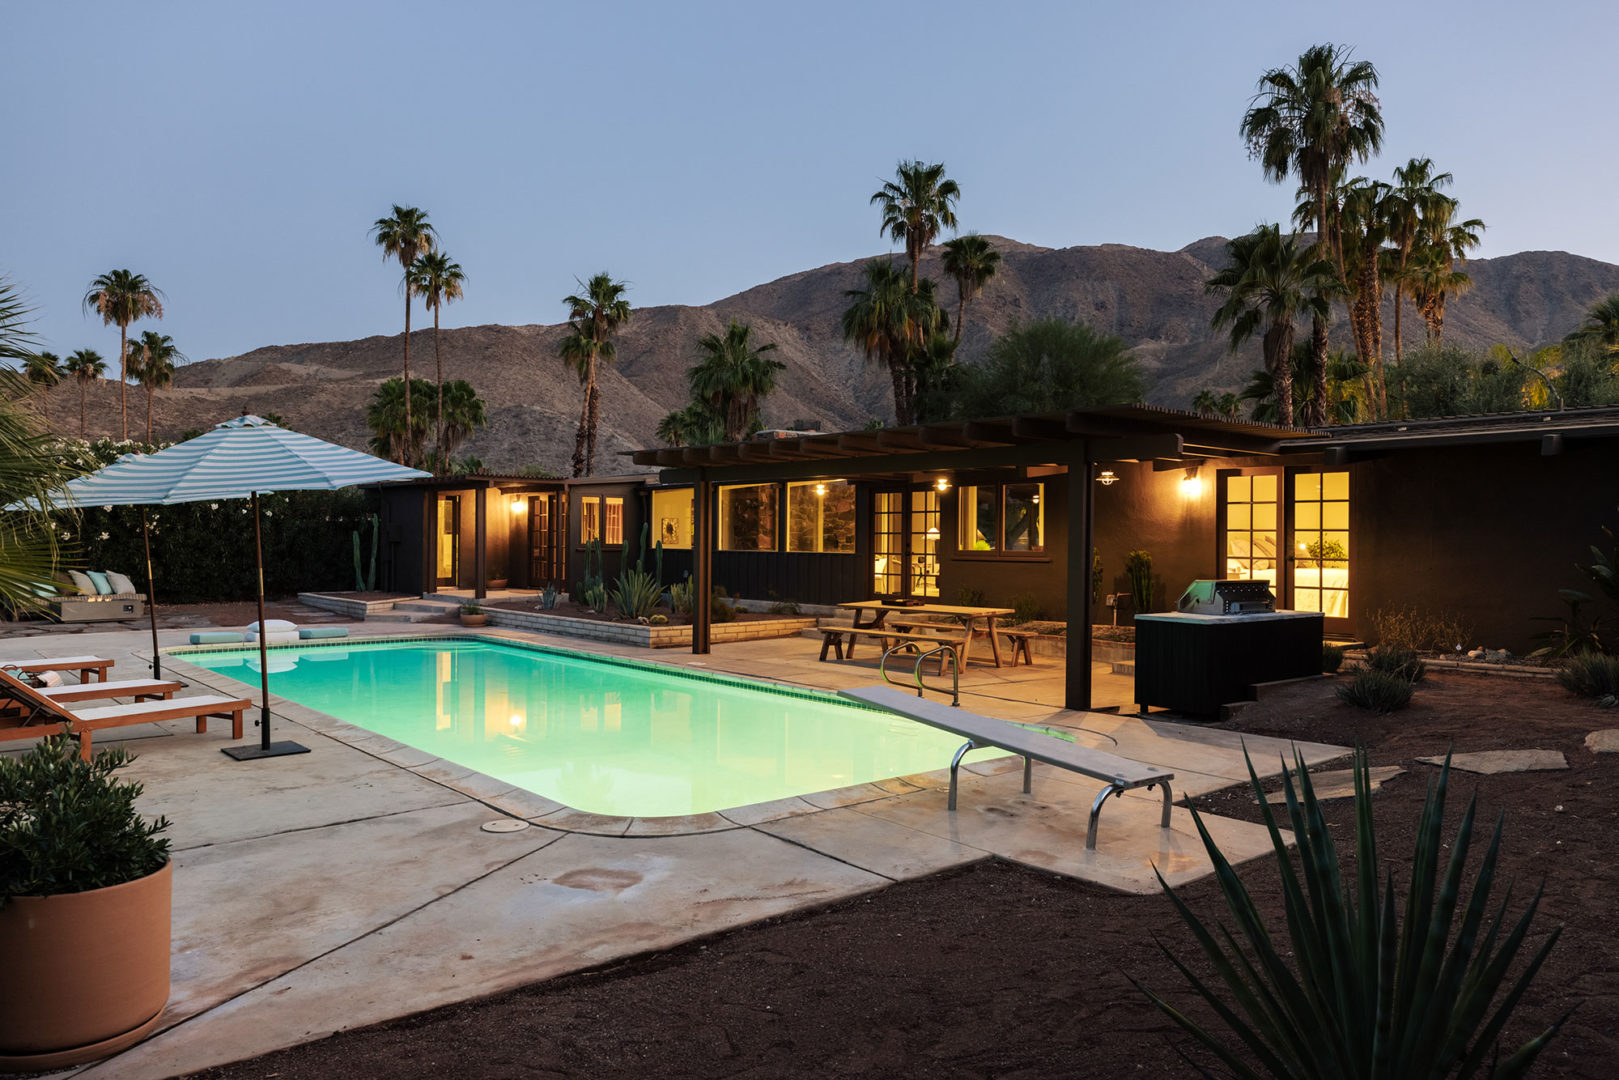 7153 Biskra Rd - Backyard at dusk with lit up pool and mountains in the background